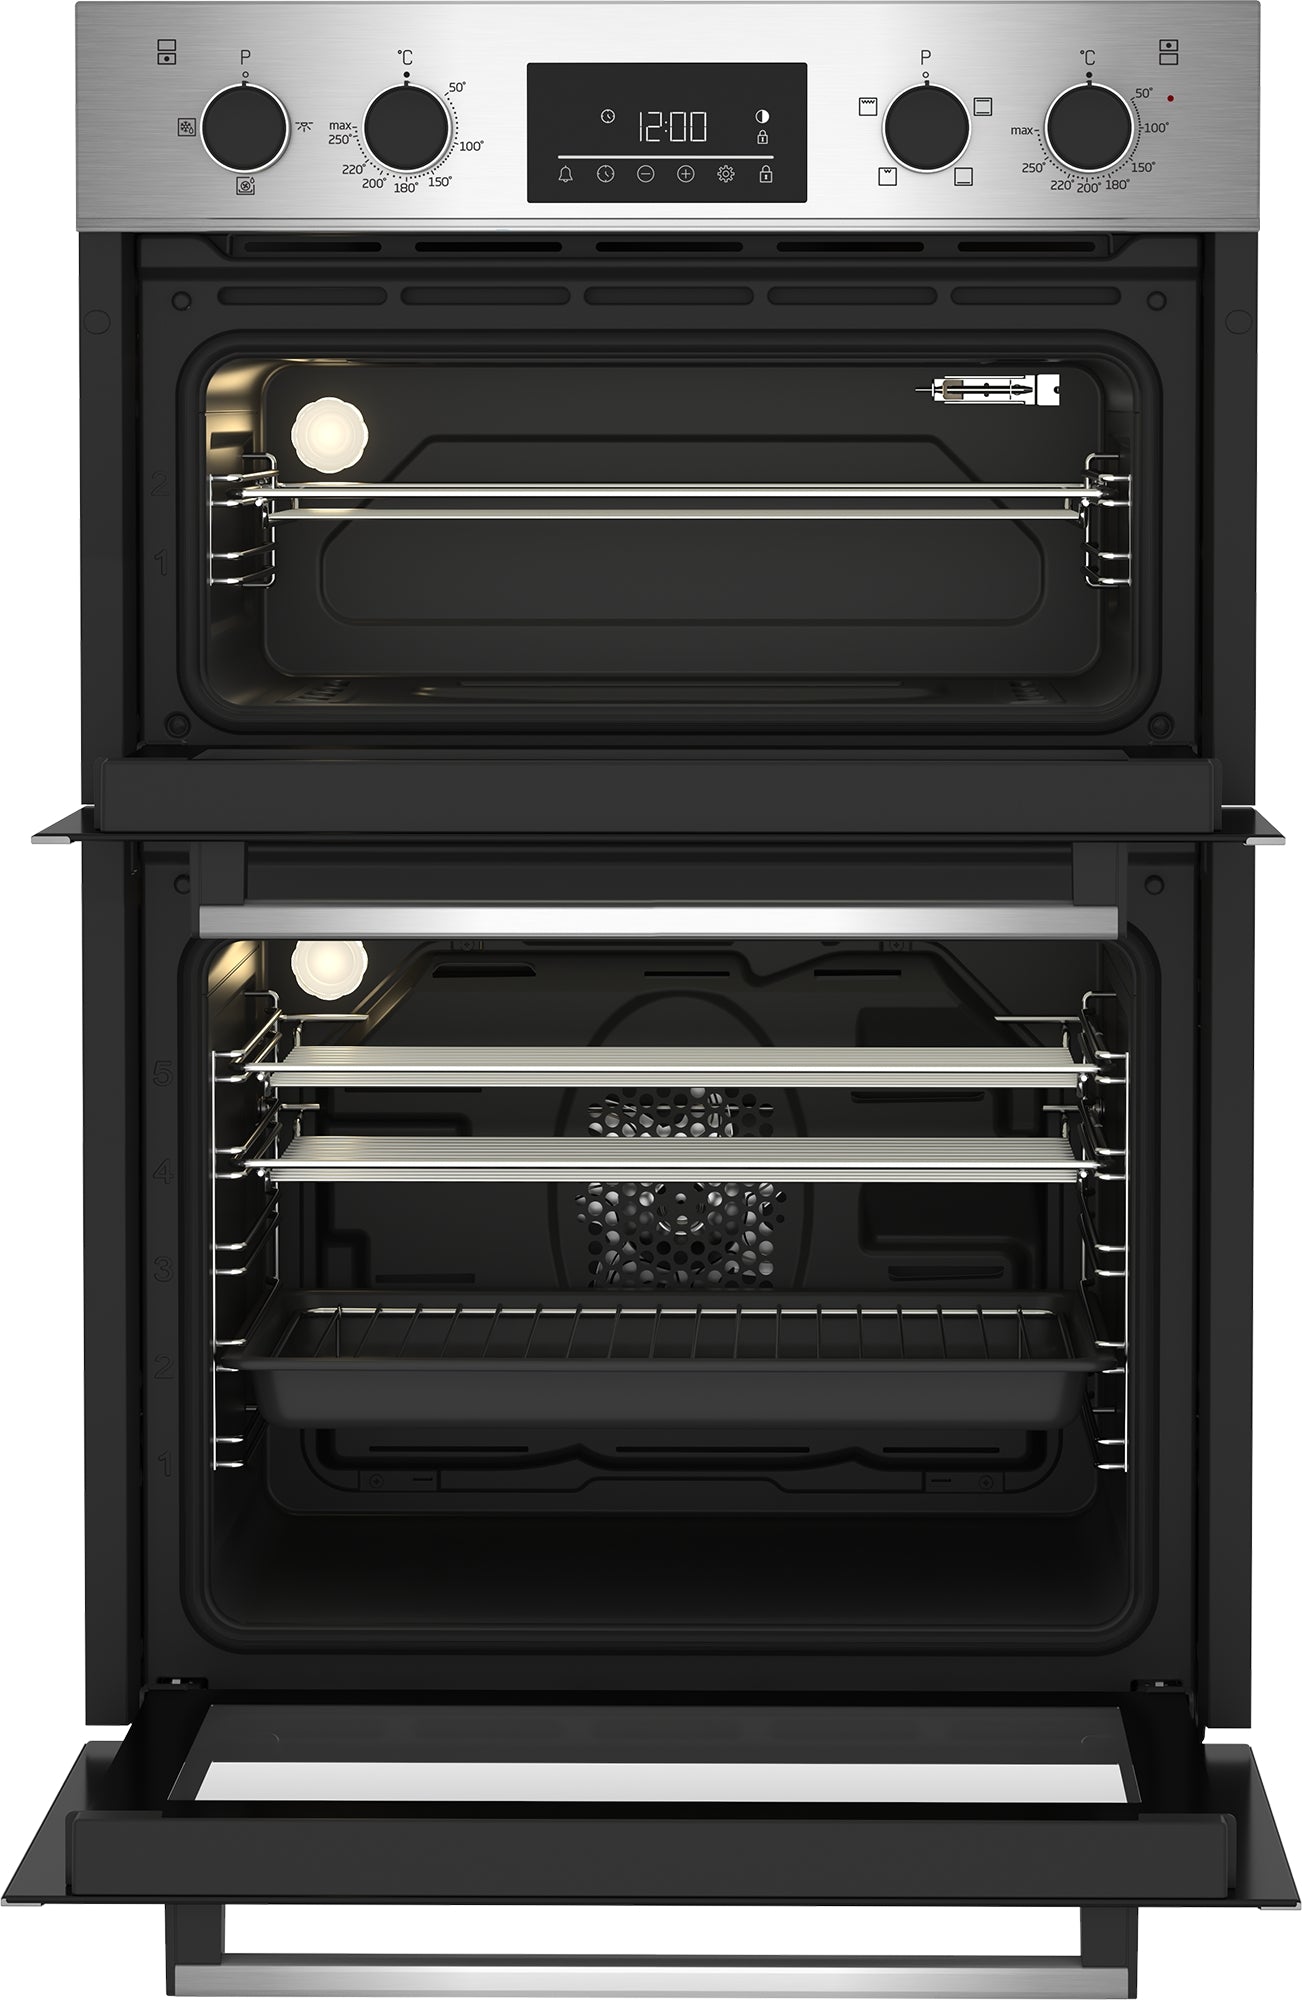 Beko BBDF26300X 90cm Built-In Double Fan Oven with 75L Capacity